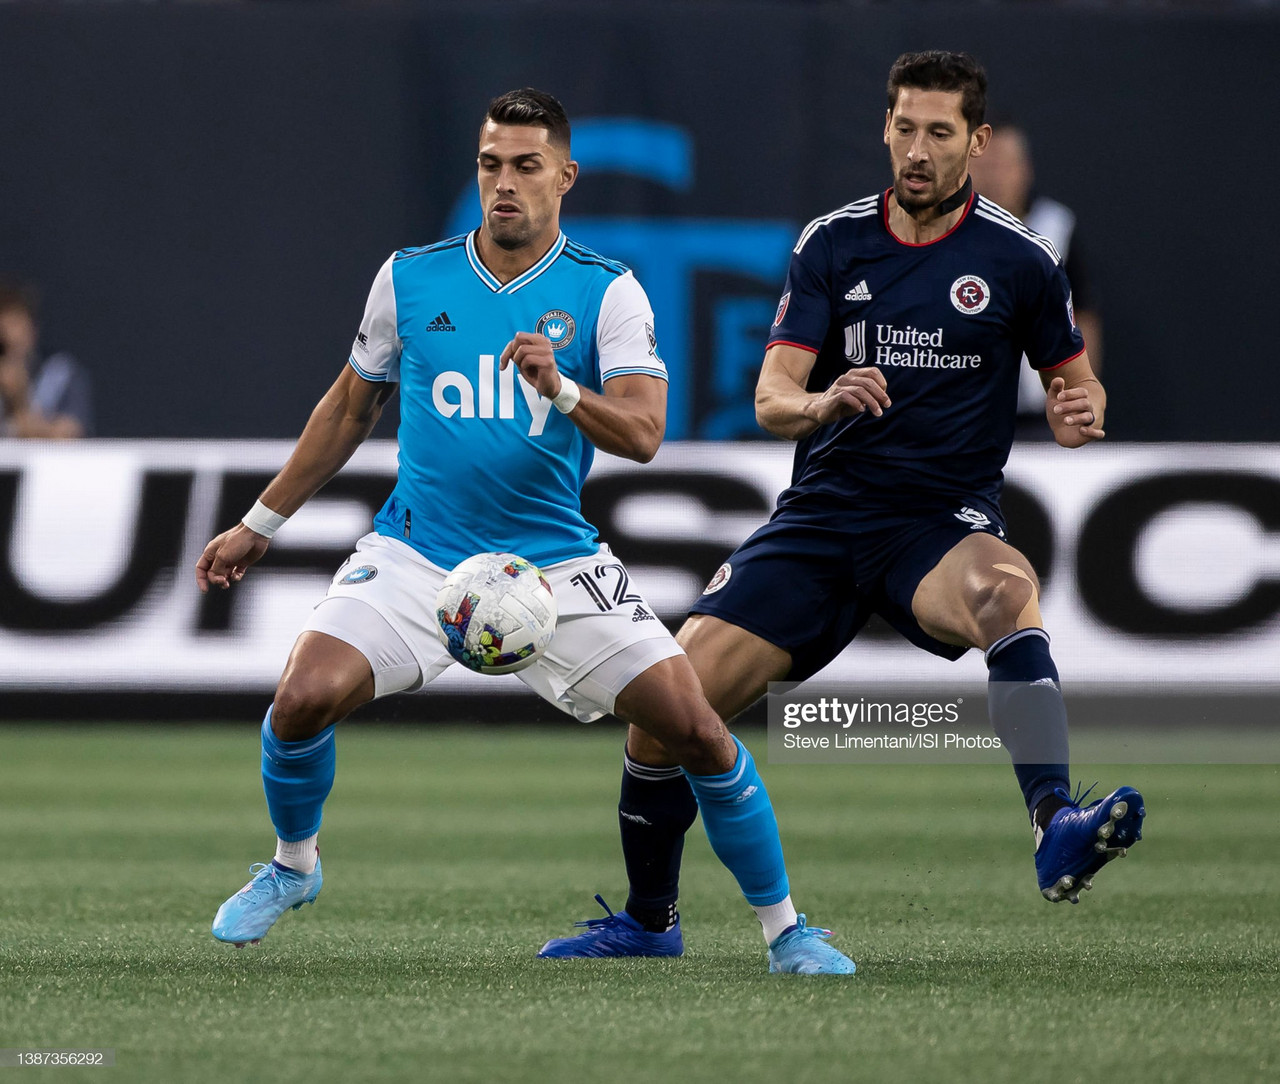 New England Revolution vs Charlotte FC preview: How to watch, team news, kickoff time, predicted lineups and ones to watch